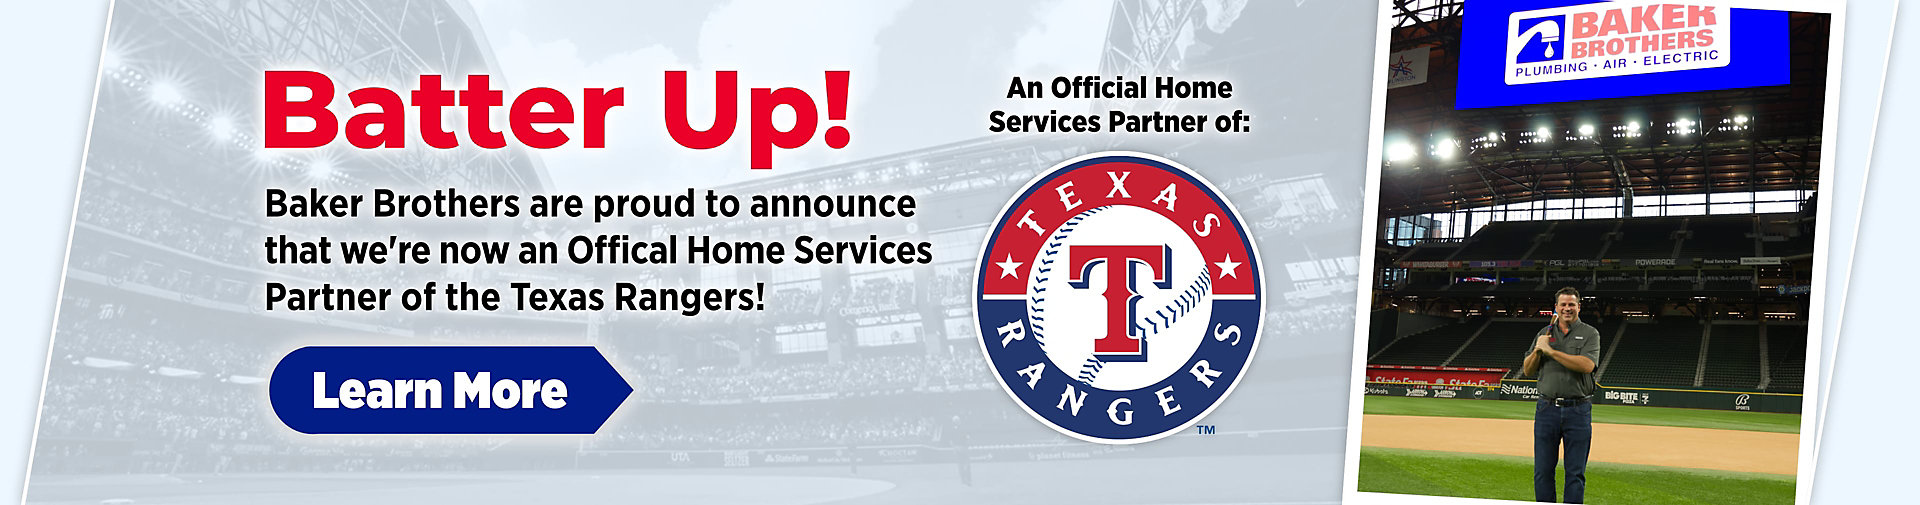 Baker Brothers is An Official Home Services Partner of The Texas Rangers